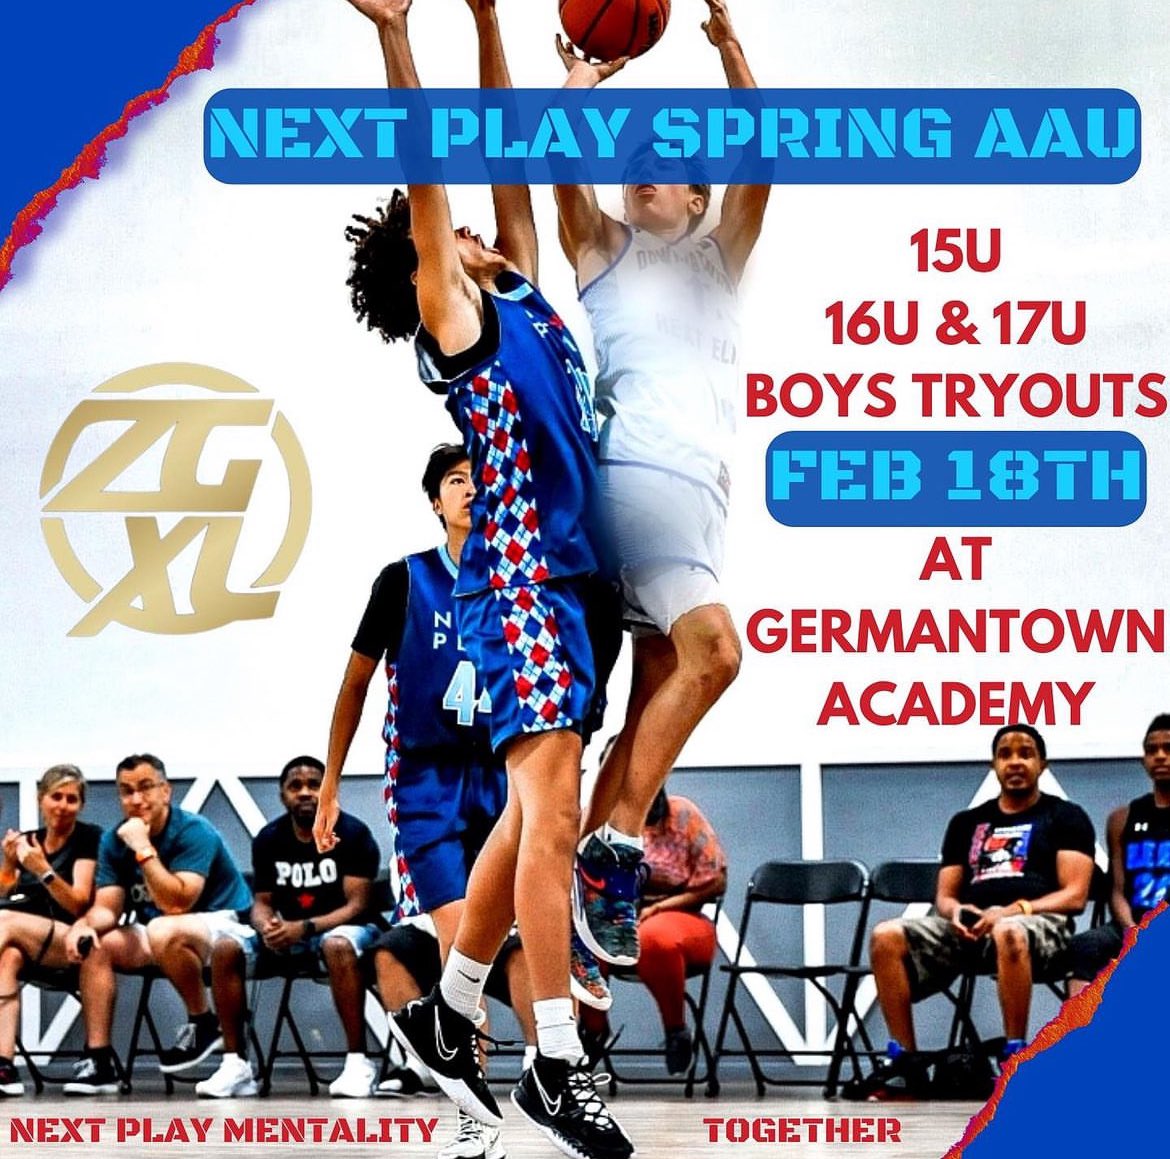 Do you want to play on the @ZeroGravityXL circuit? Get great coaching? And play team basketball? Register to Tryout for Next Play nextplaybasketball.com/teams